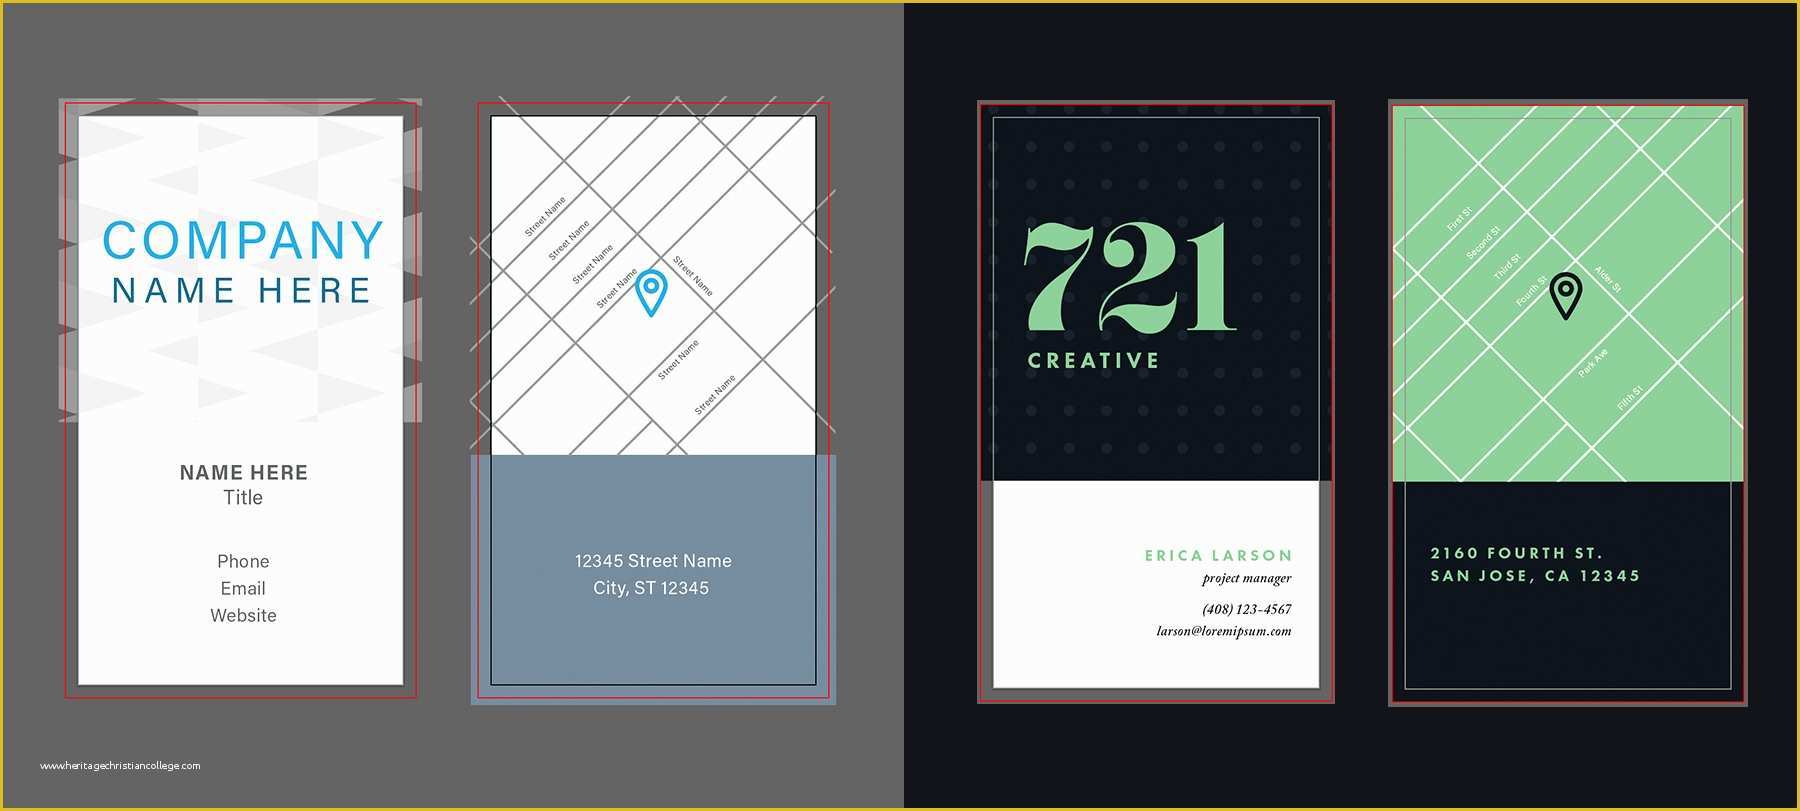 Business Card Template Illustrator Free Of Customize An Illustrator Template today